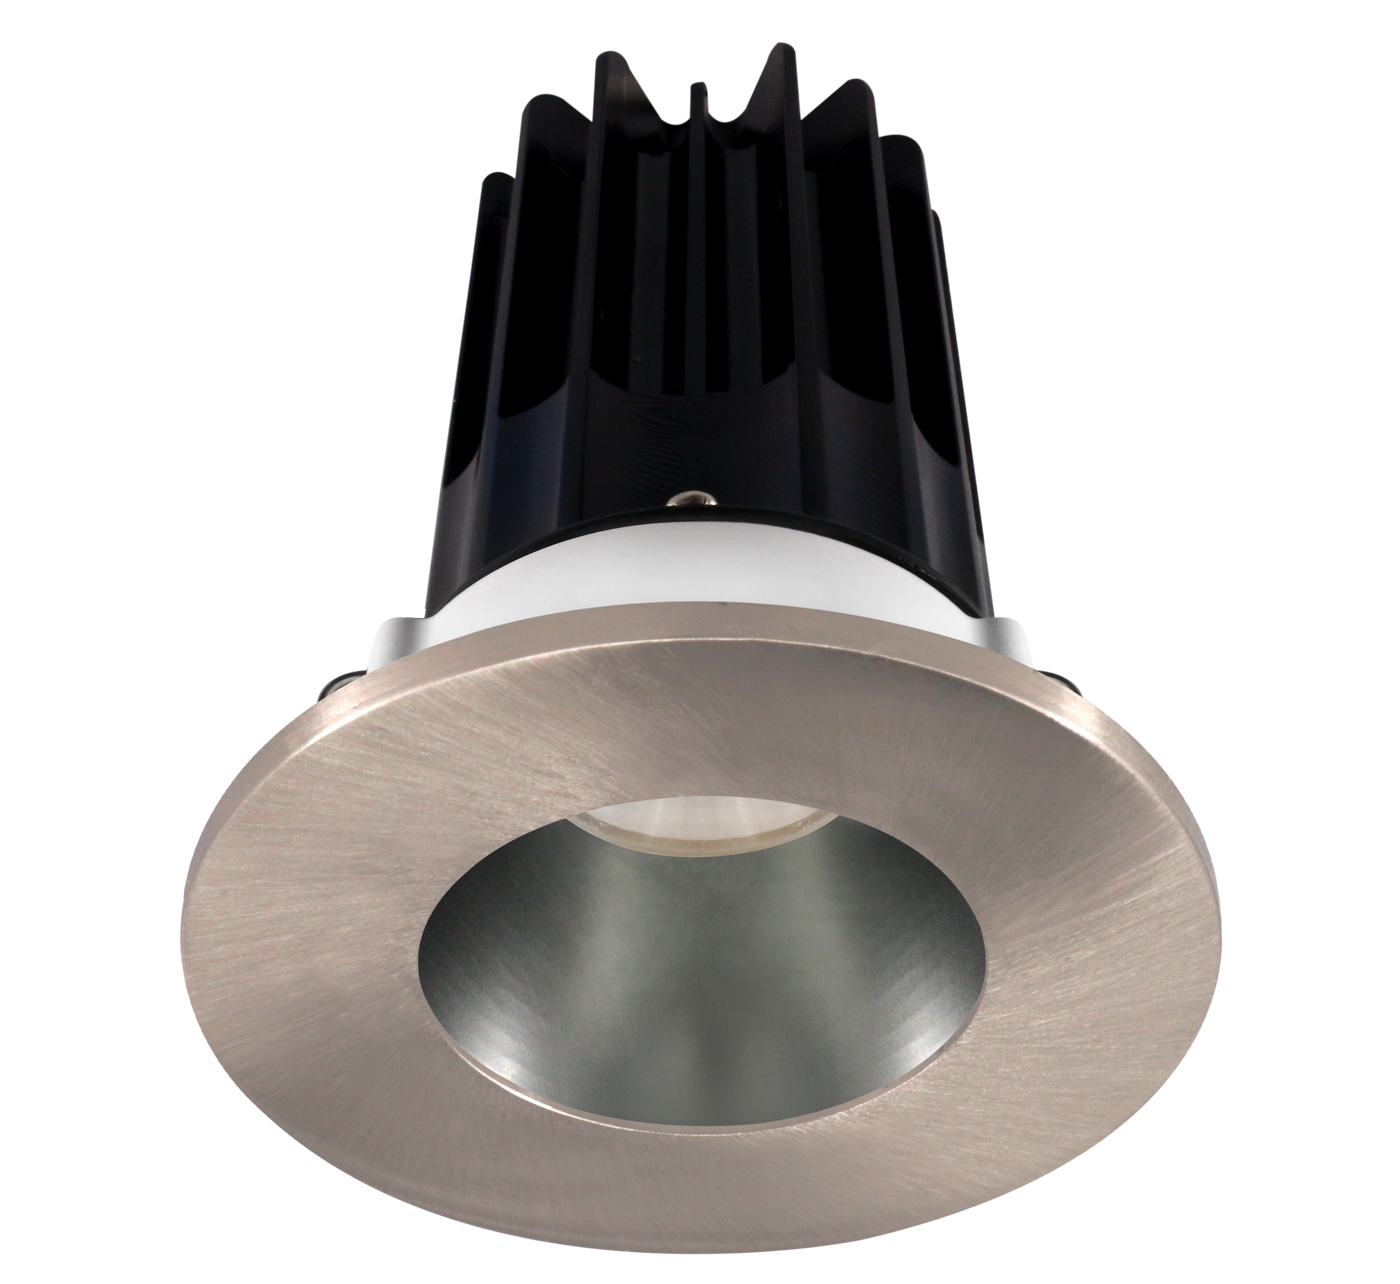 2" Recessed LED, 8W, 3000K, Multiple Reflectors and Round Trims